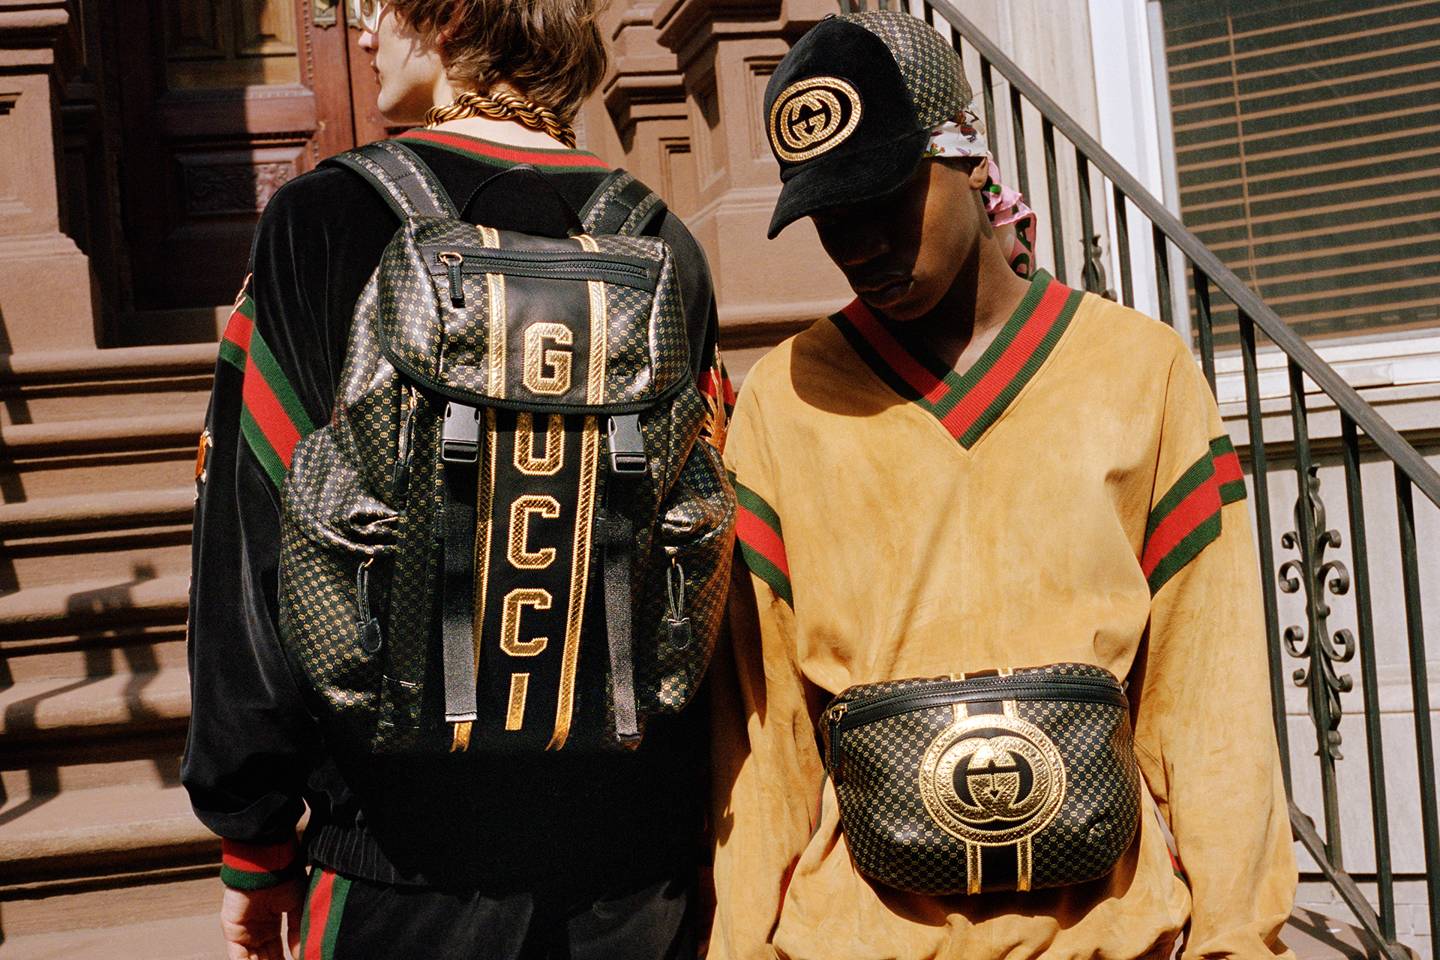 Gucci, Dapper Dan, and Why Fashion Needs to Pay Homage Properly